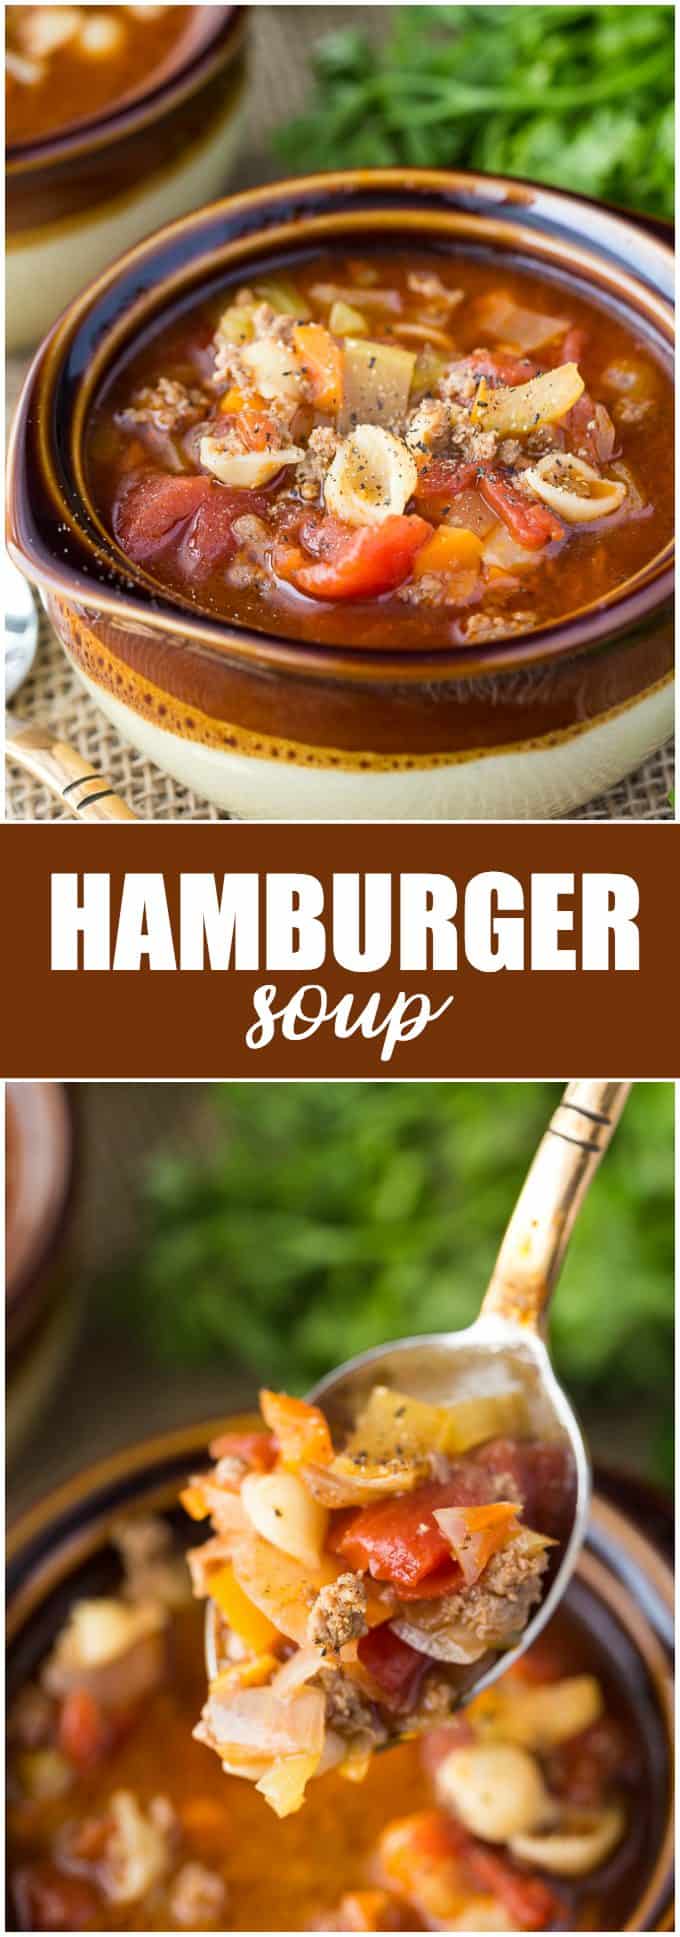 Hamburger Soup - A yummy winter soup recipe! This tomato-based soup is packed with vegetables and seasoned ground beef for the best burger in a bowl.